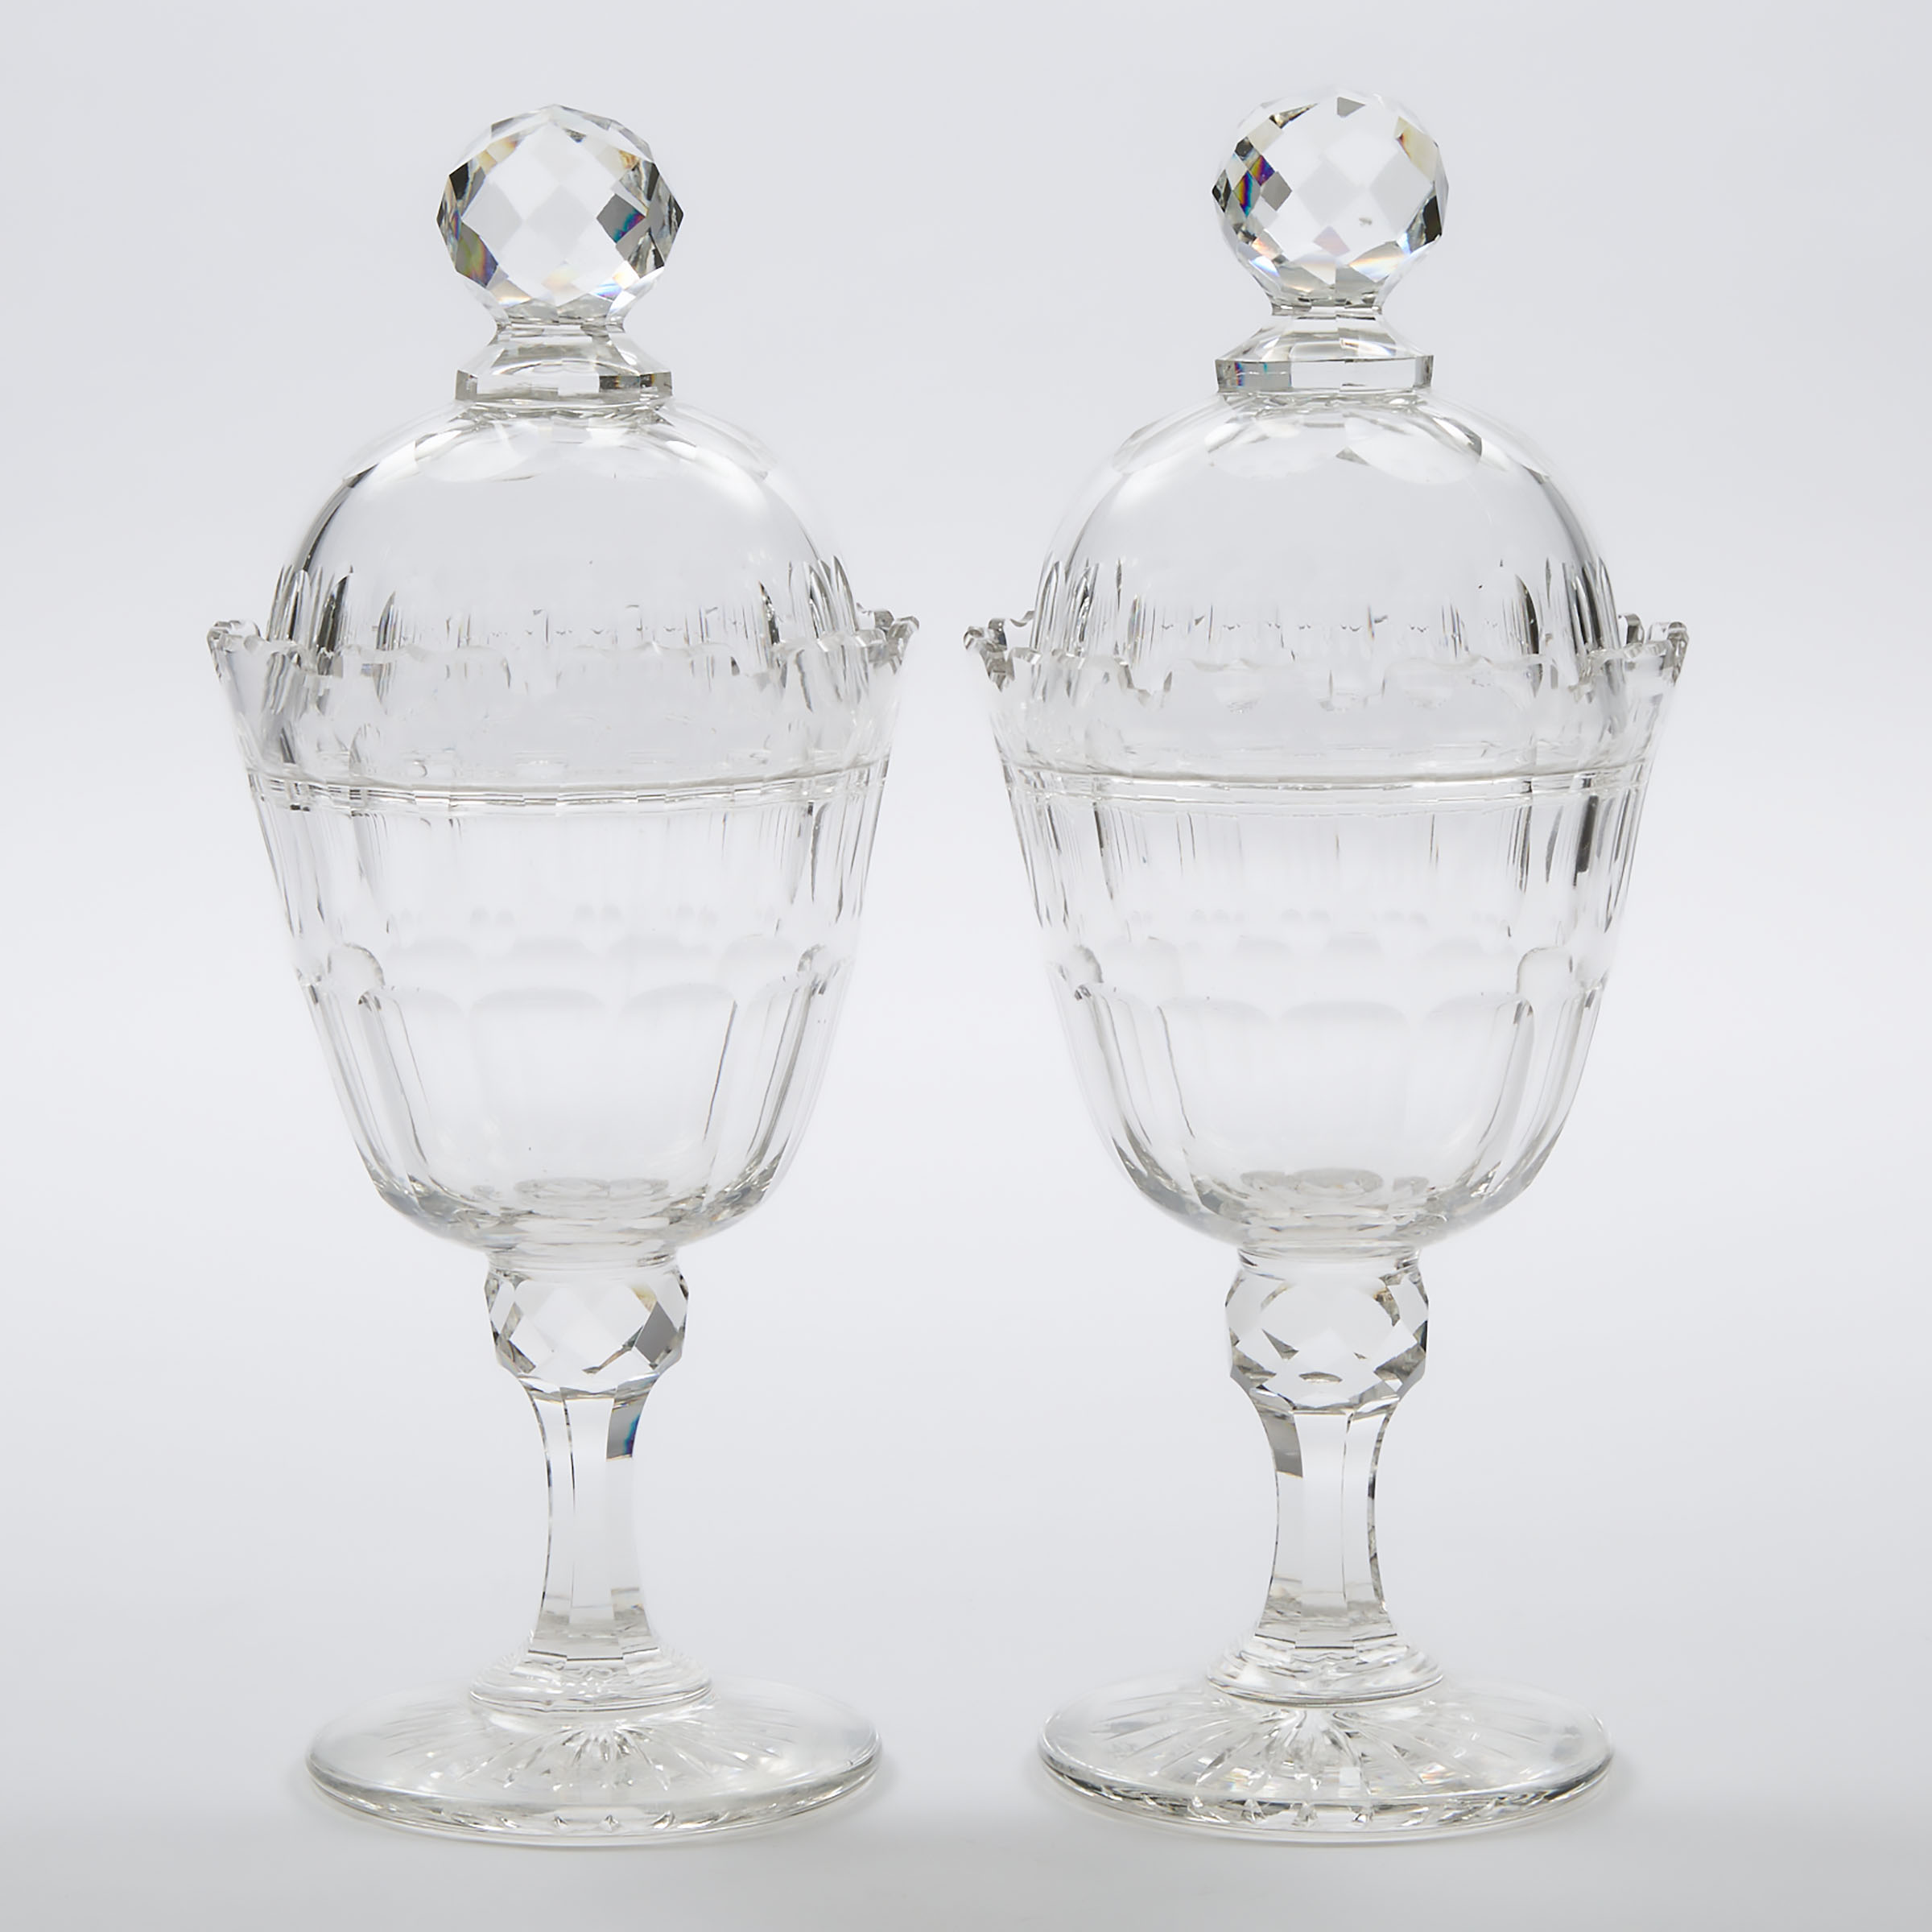 Pair of Continental Cut Glass Sweetmeat Vases and Covers, late 19th/early 20th century